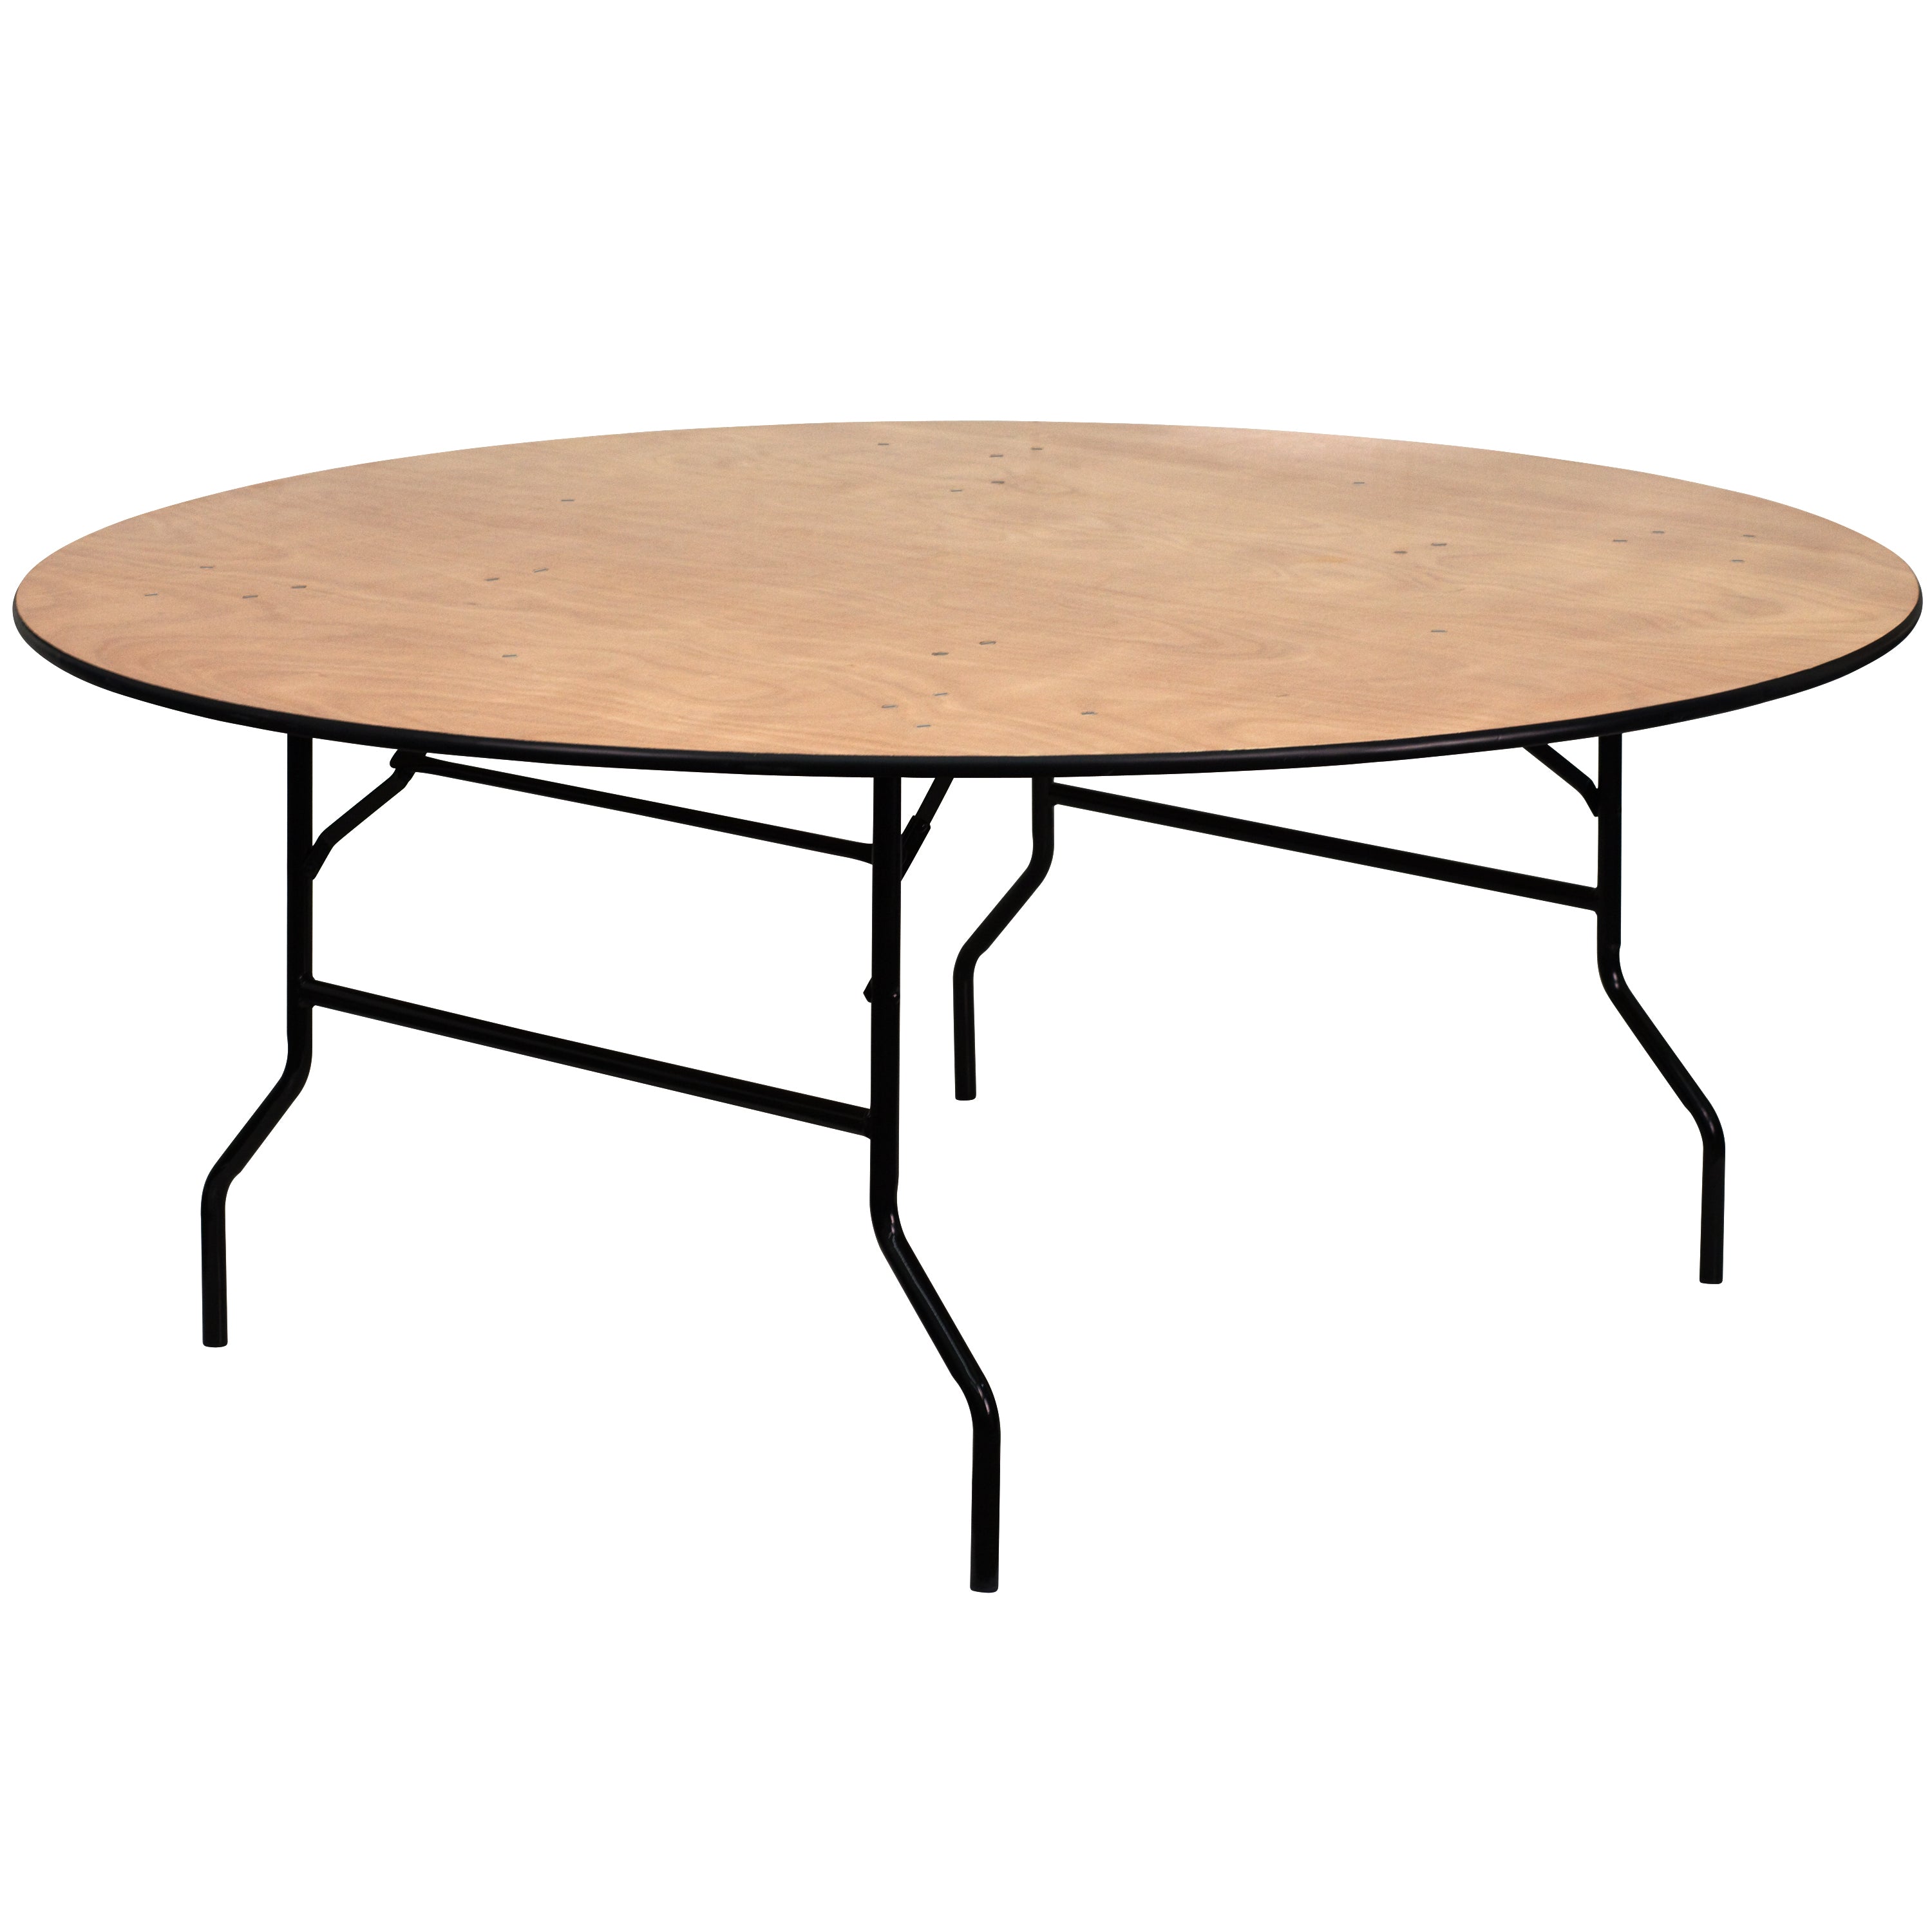 6-Foot Round Wood Folding Banquet Table with Clear Coated Finished Top-Round Folding Table-Flash Furniture-Wall2Wall Furnishings